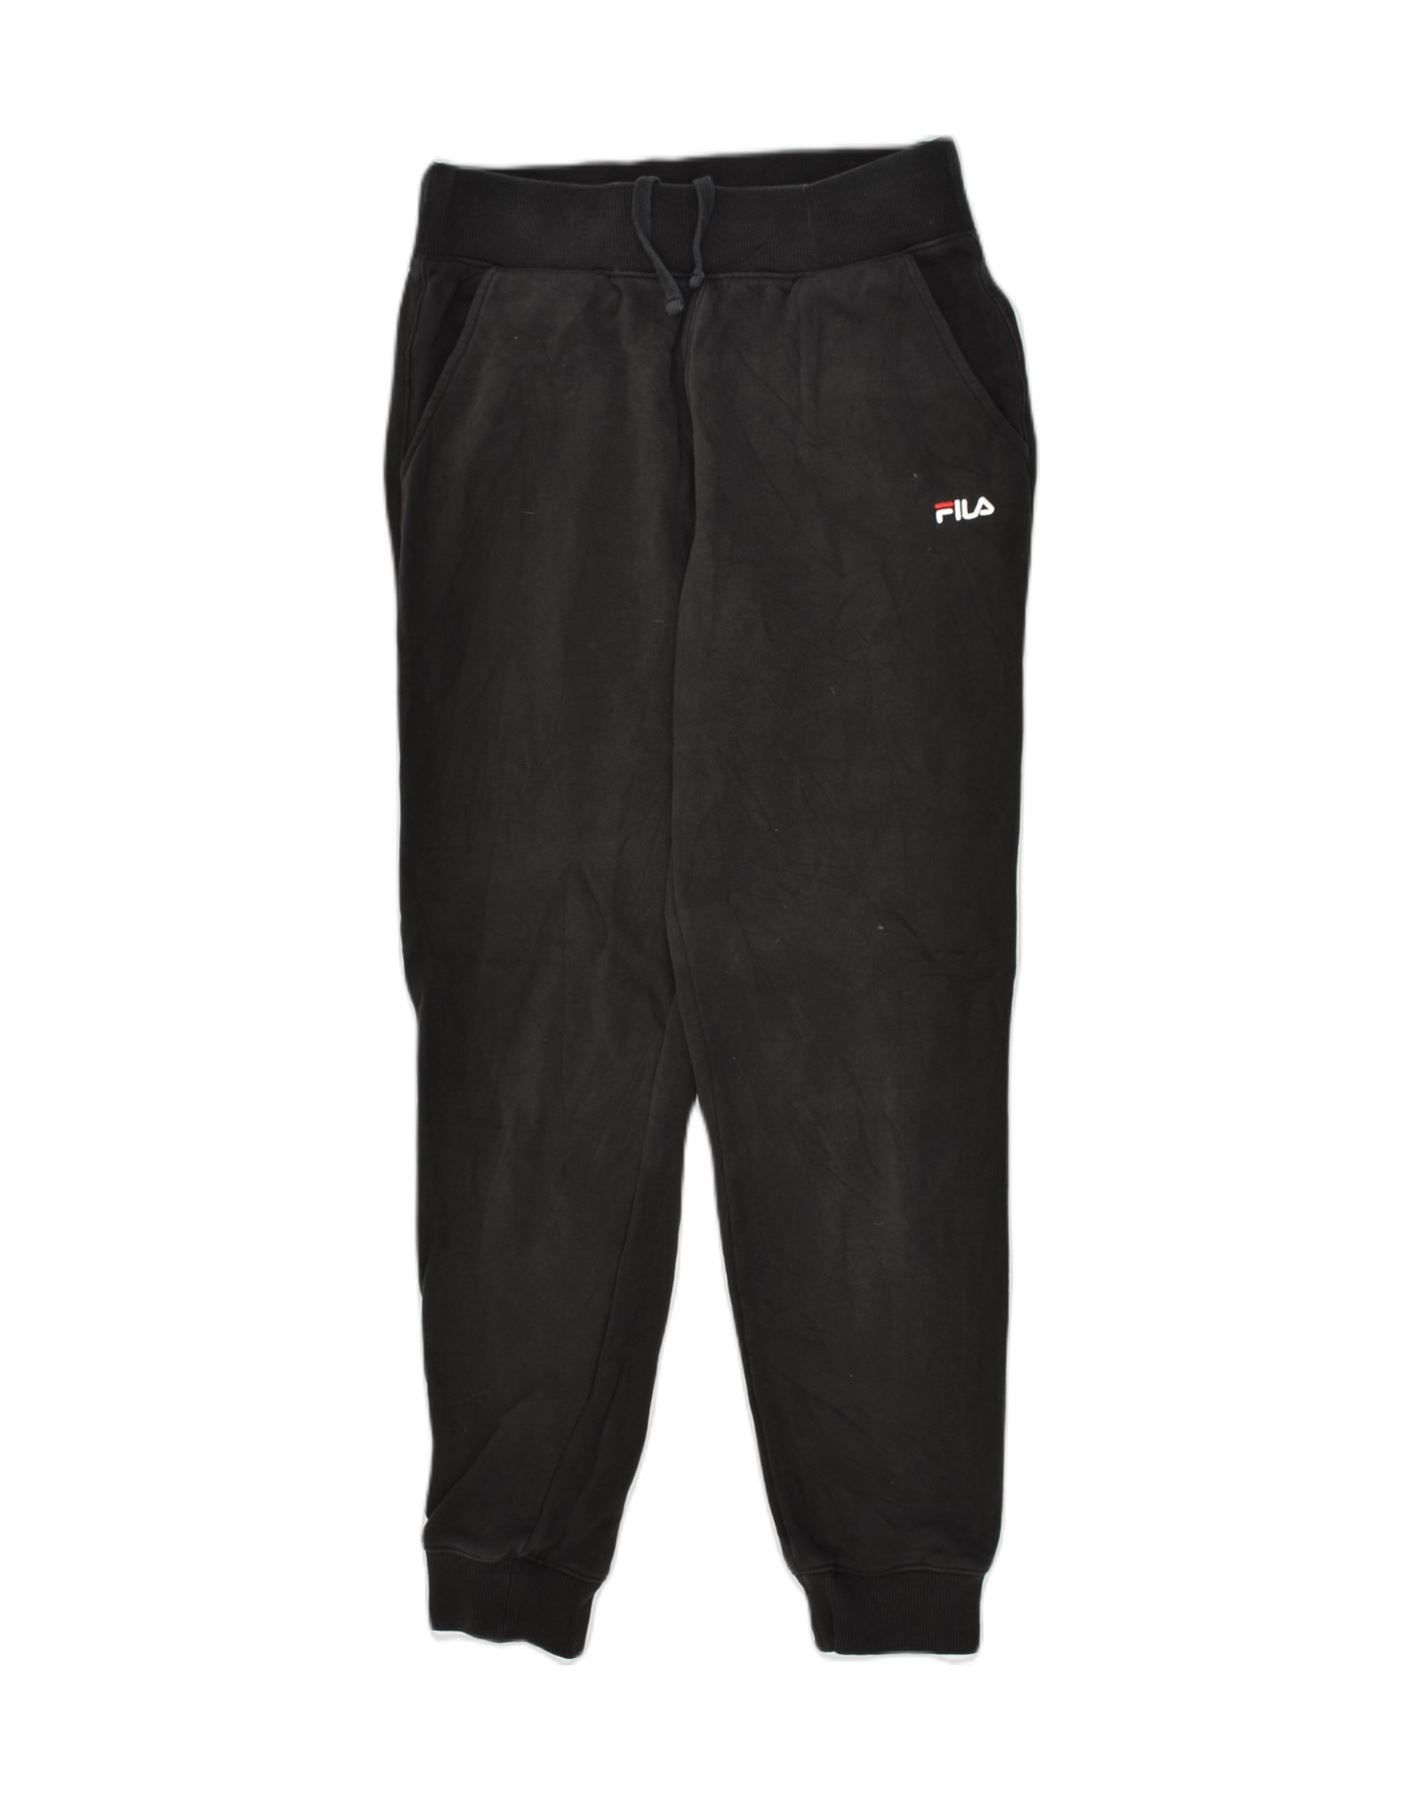 FILA Womens Tracksuit Trousers Joggers UK 10 Small Black Polyester, Vintage & Second-Hand Clothing Online